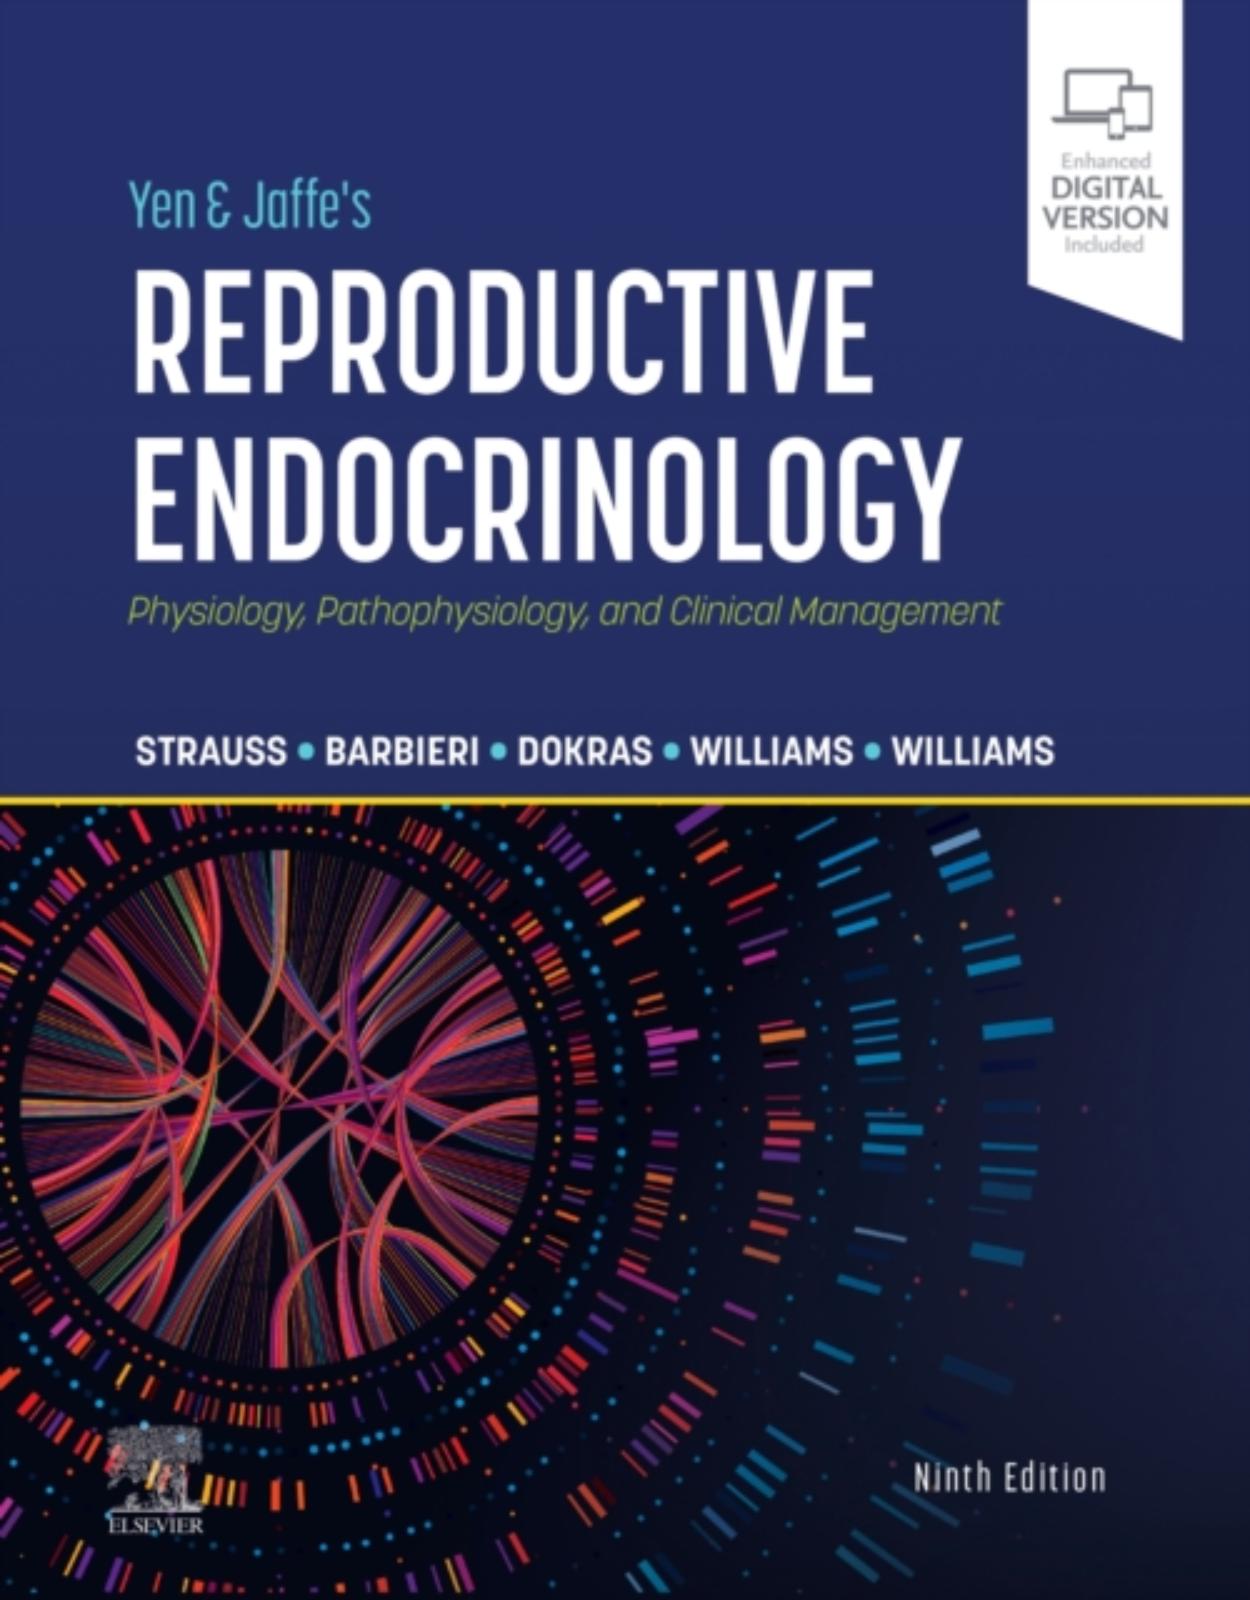 Yen & Jaffe’s Reproductive Endocrinology: Physiology, Pathophysiology, and Clinical Management